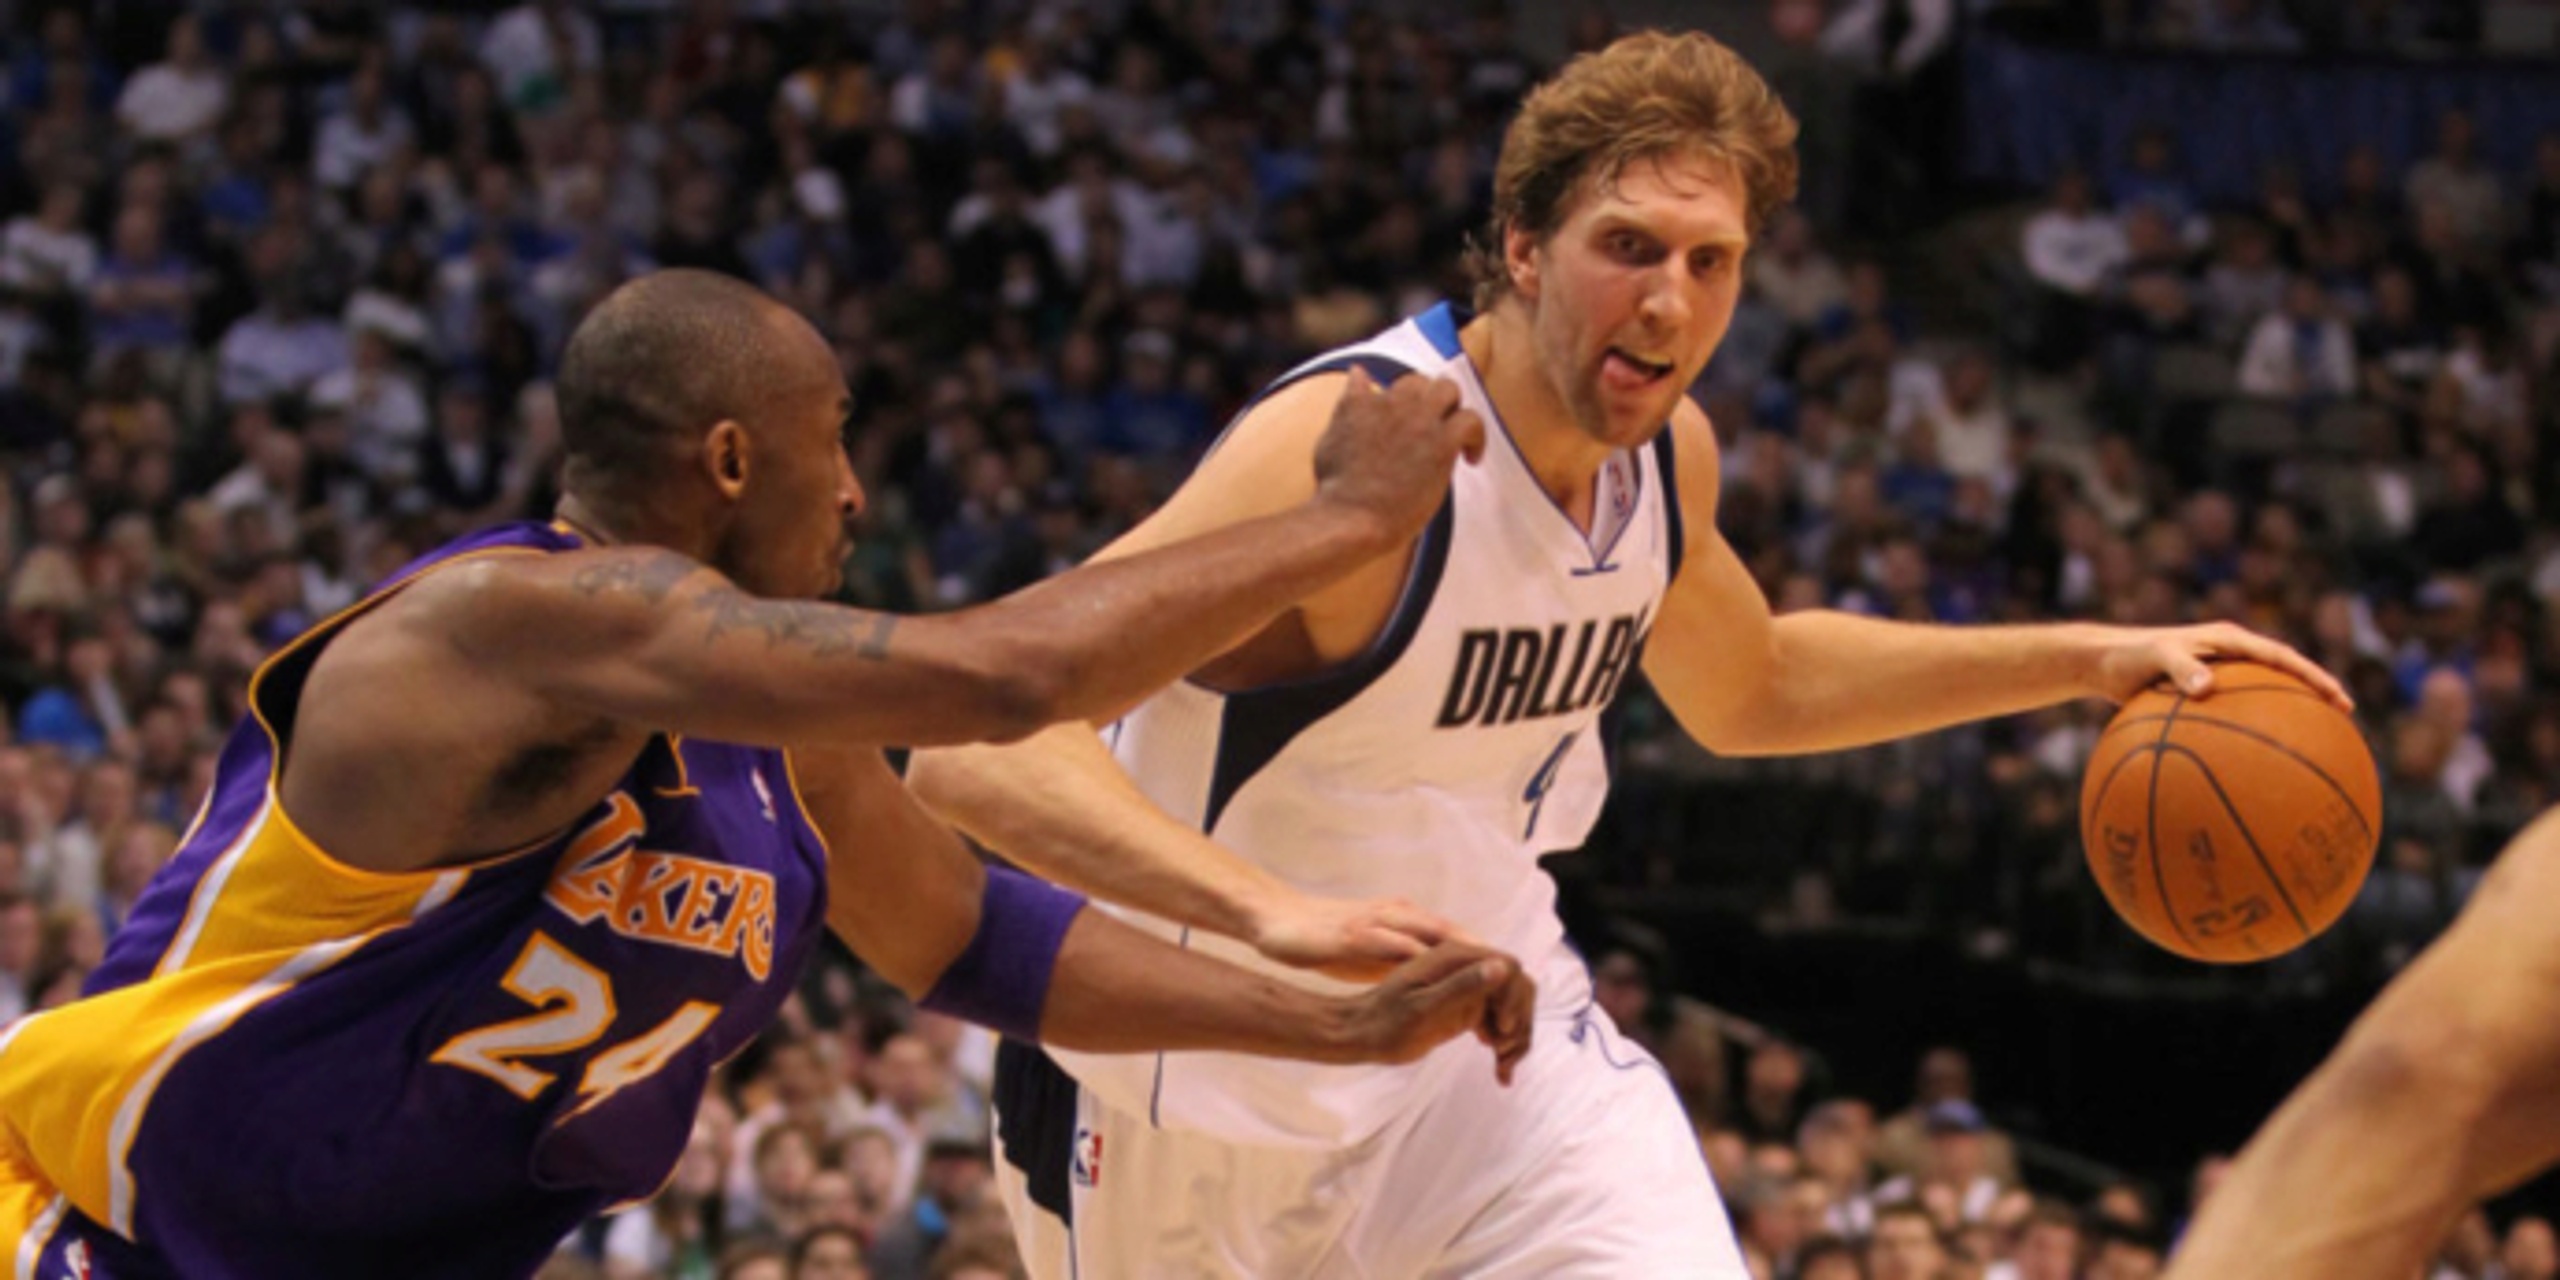 After Dirk Nowitzki won his first NBA title, Kobe tried to recruit him